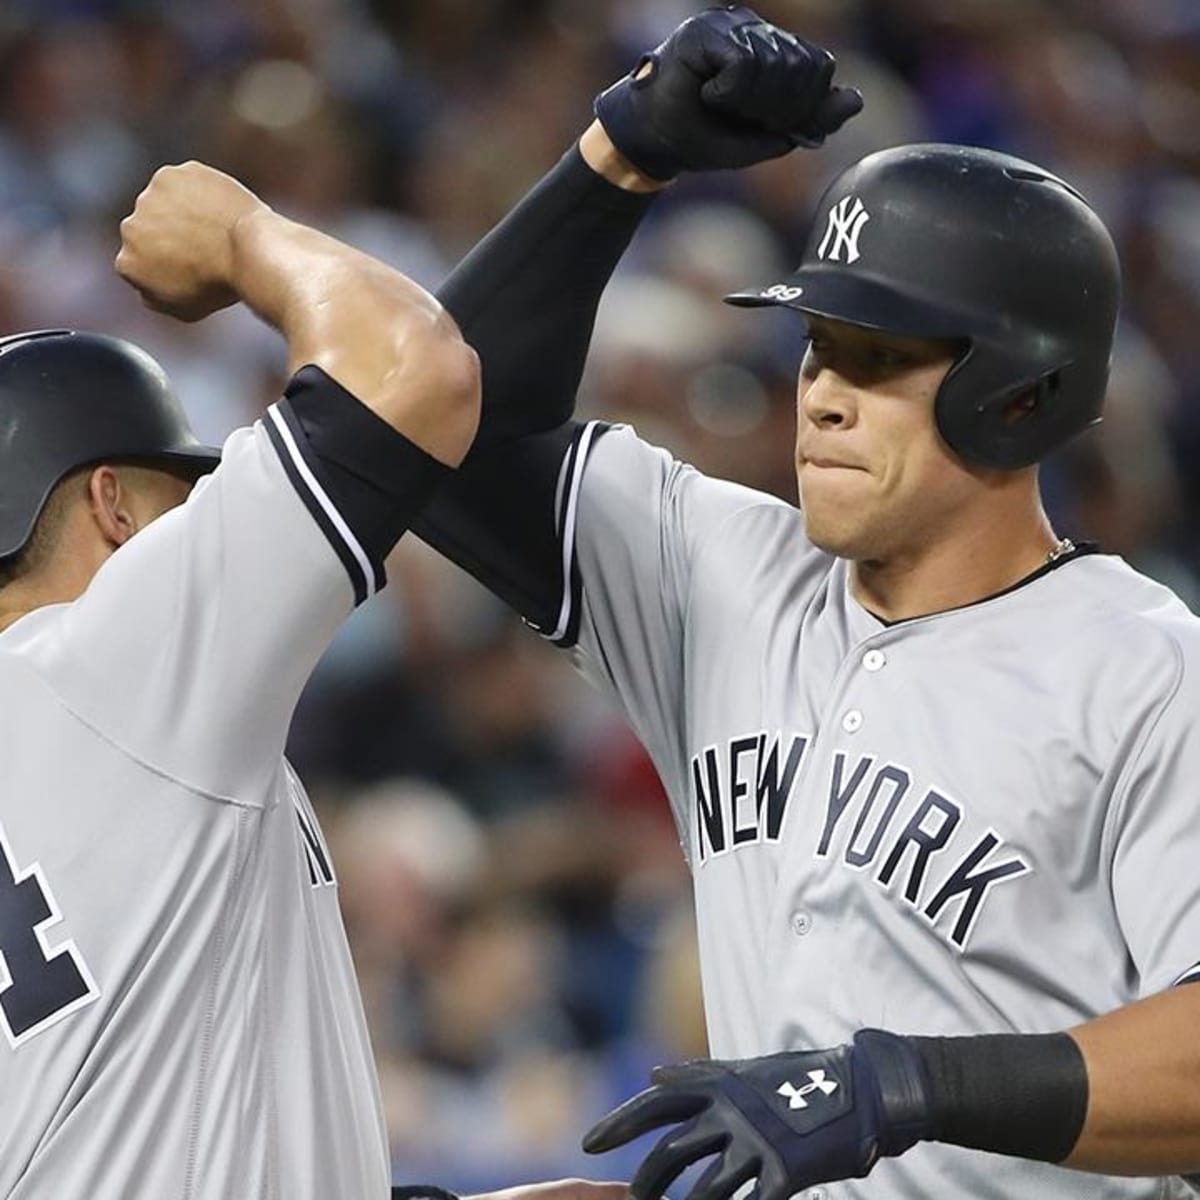 Home Run Derby: Aaron Judge and Gary Sanchez to compete - Sports Illustrated